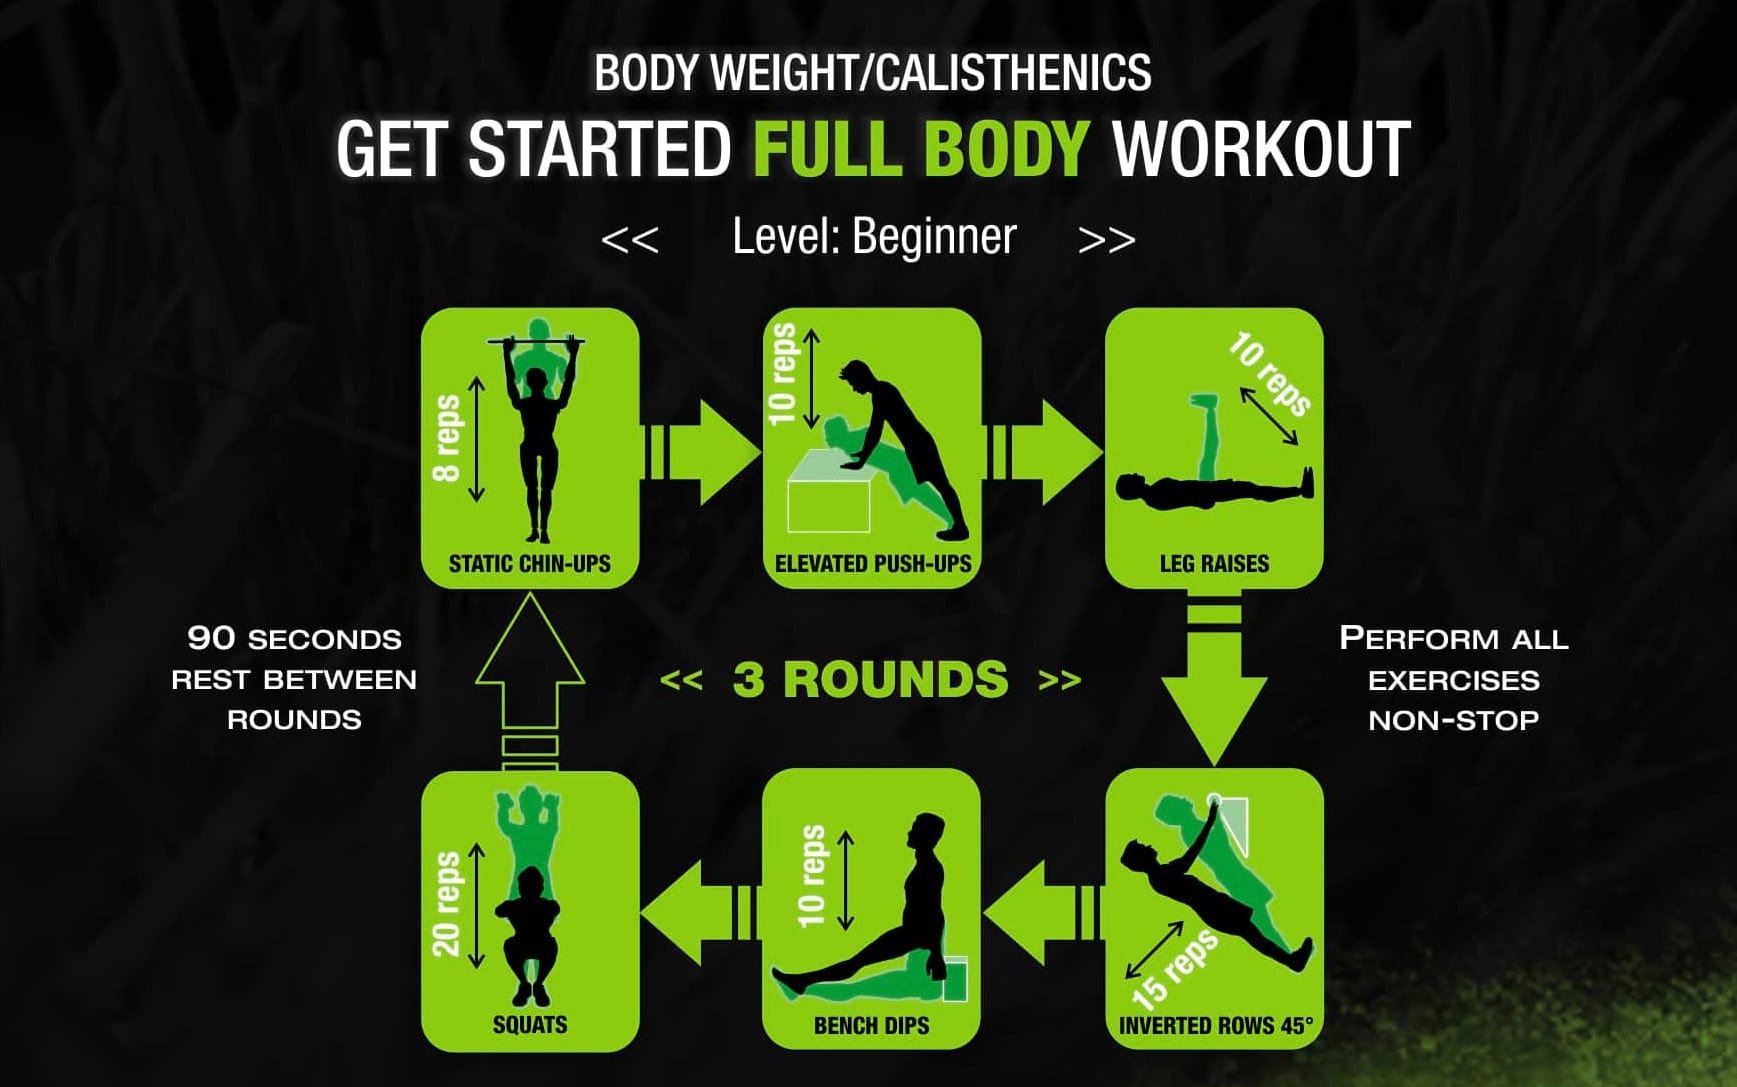 Details on basic Calisthenics workout plan for beginneres to lose weight